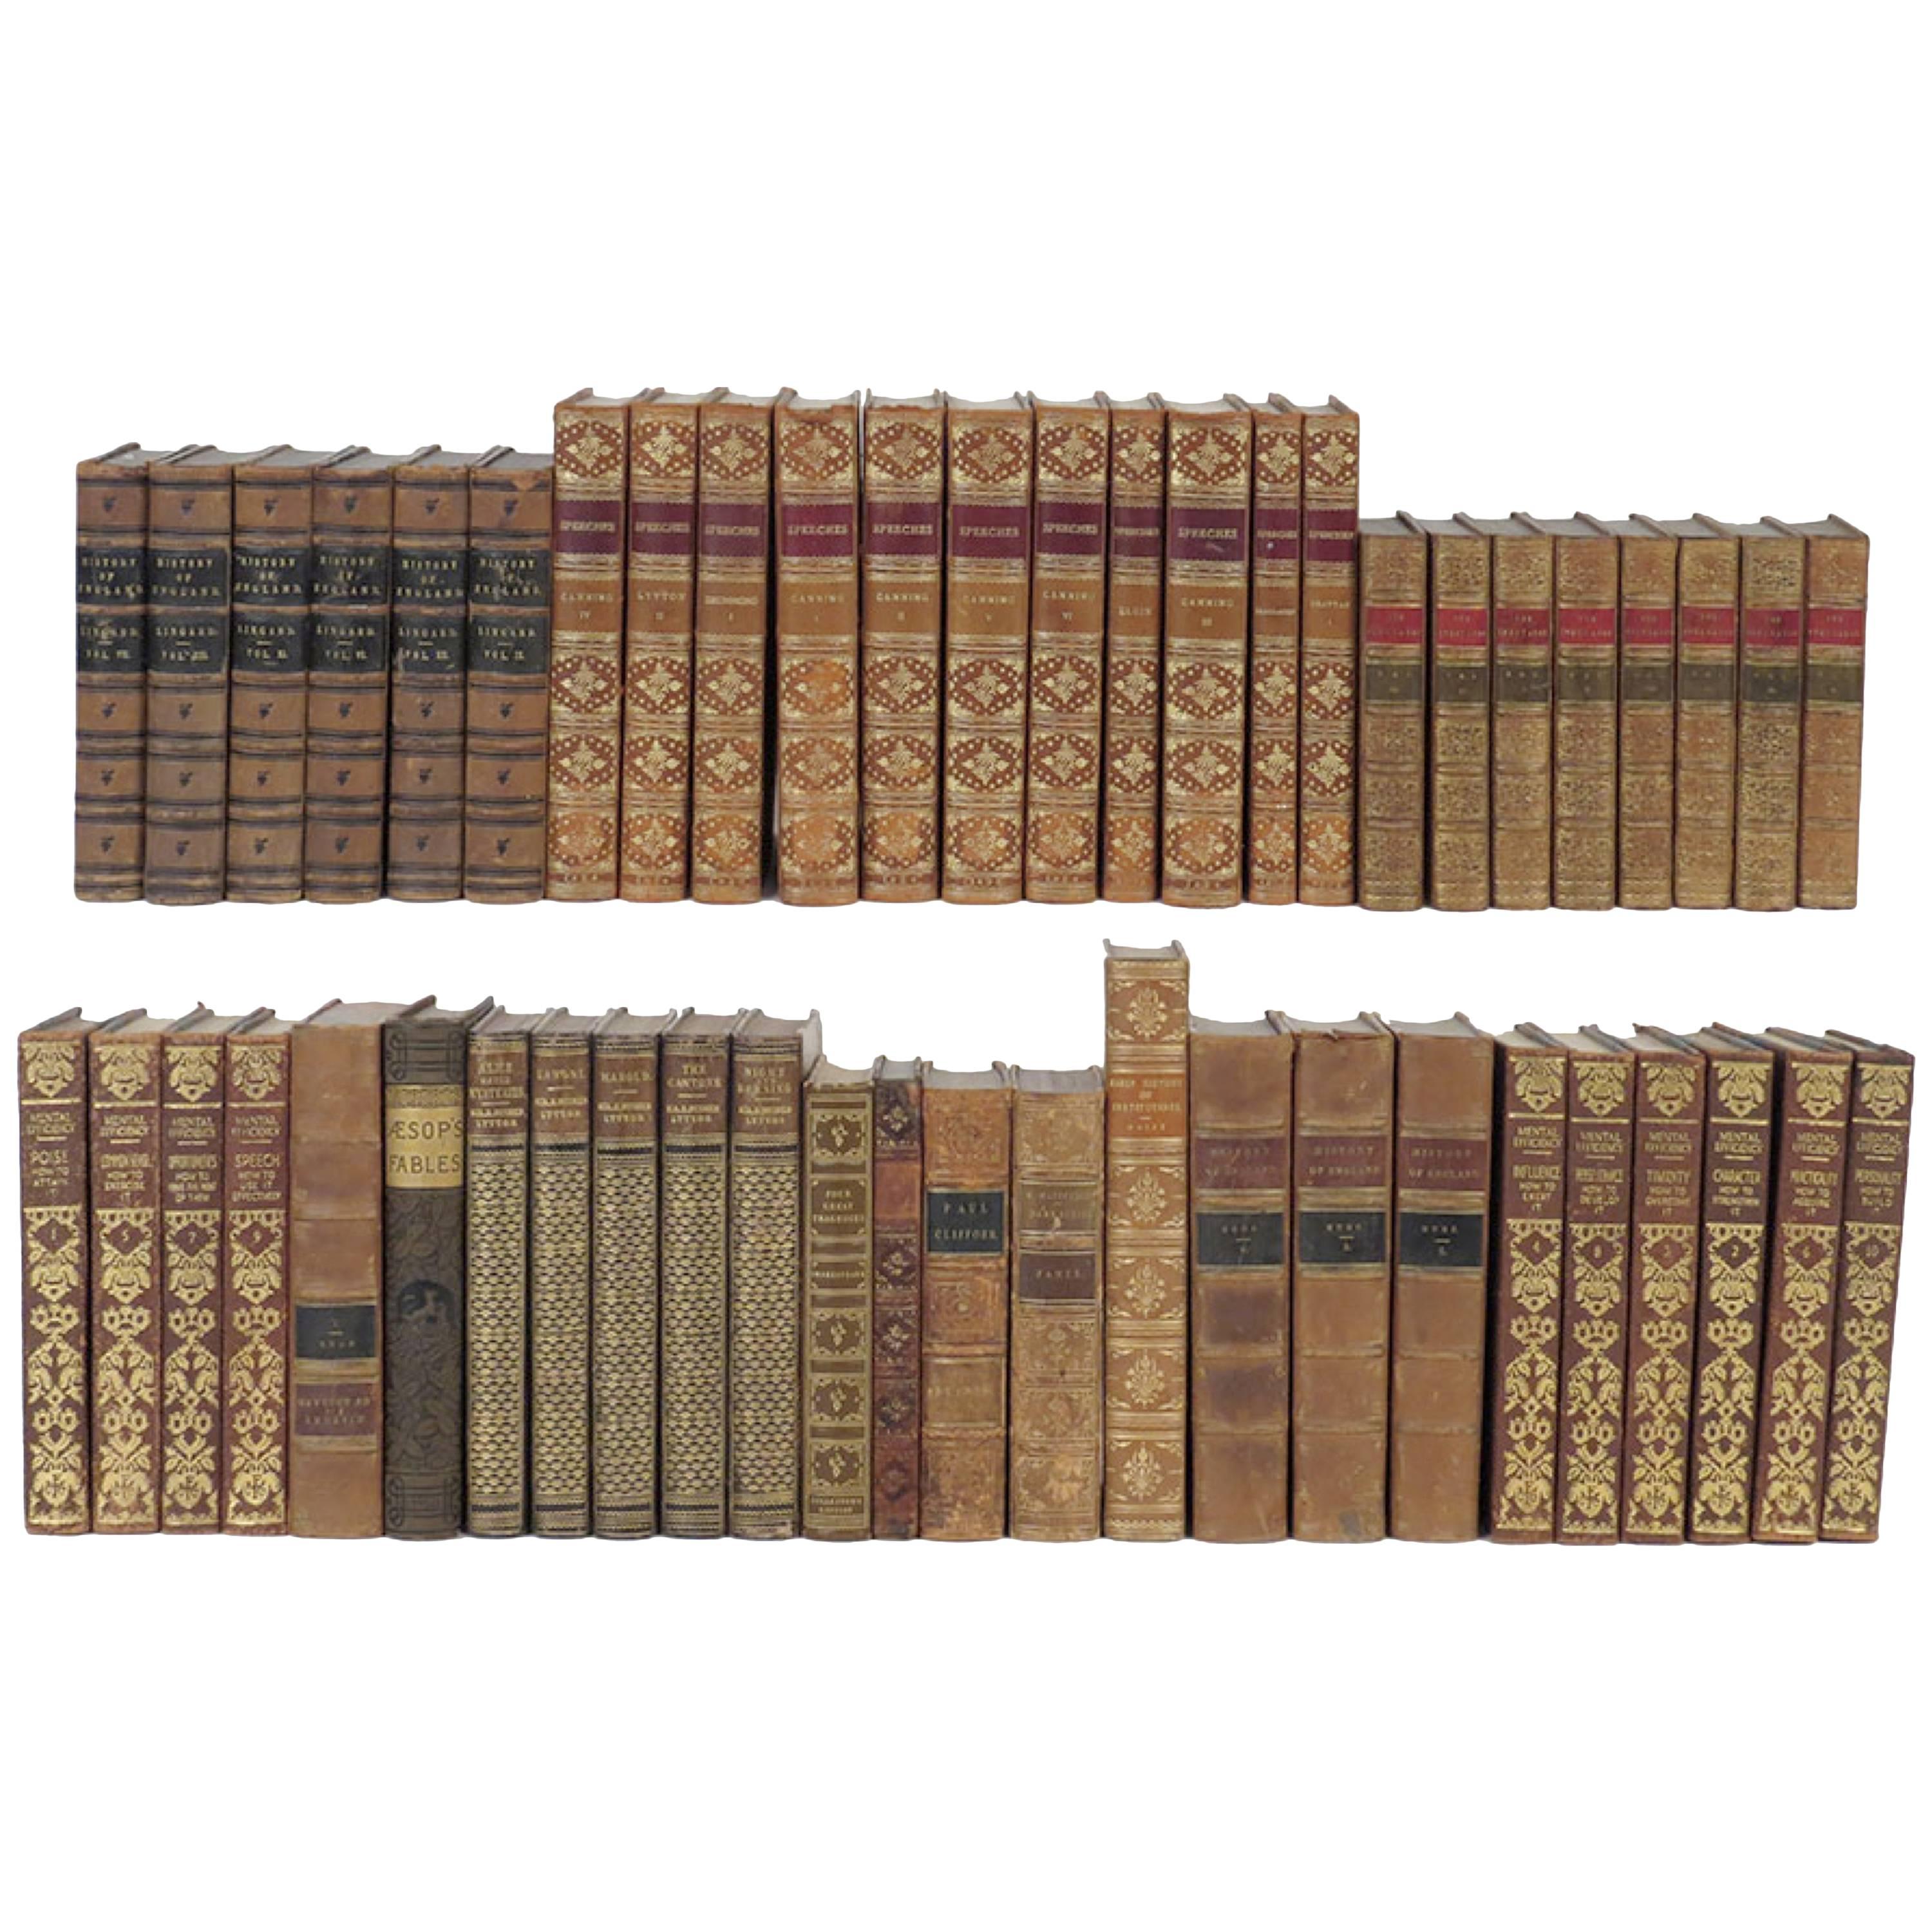 New Shipment Of Assorted Leather Bound Books, Priced Per Book. English For Sale